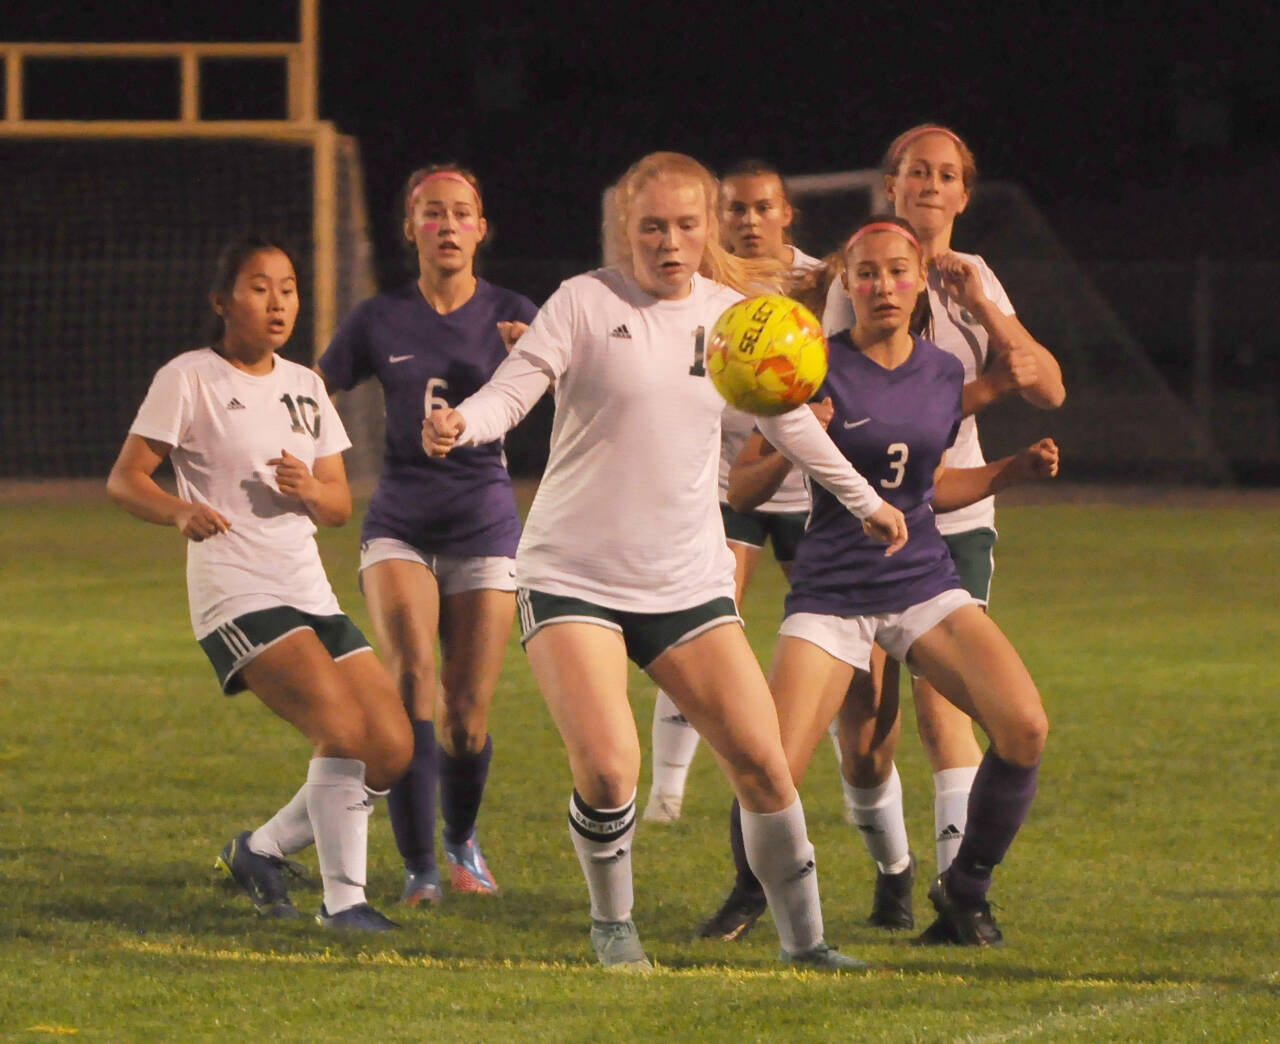 Michael Dashiell/Sequim Gazette
Port Angeles’ Paige Mason, center looks to control the ball as, from left, Port Angeles’ Lily Sanders (10) and Sequim’s Teagen Moore (6) and Taryn Johnson (3) look on in an Olympic League match on Oct. 11. Port Angeles edged their rivals, 3-2.